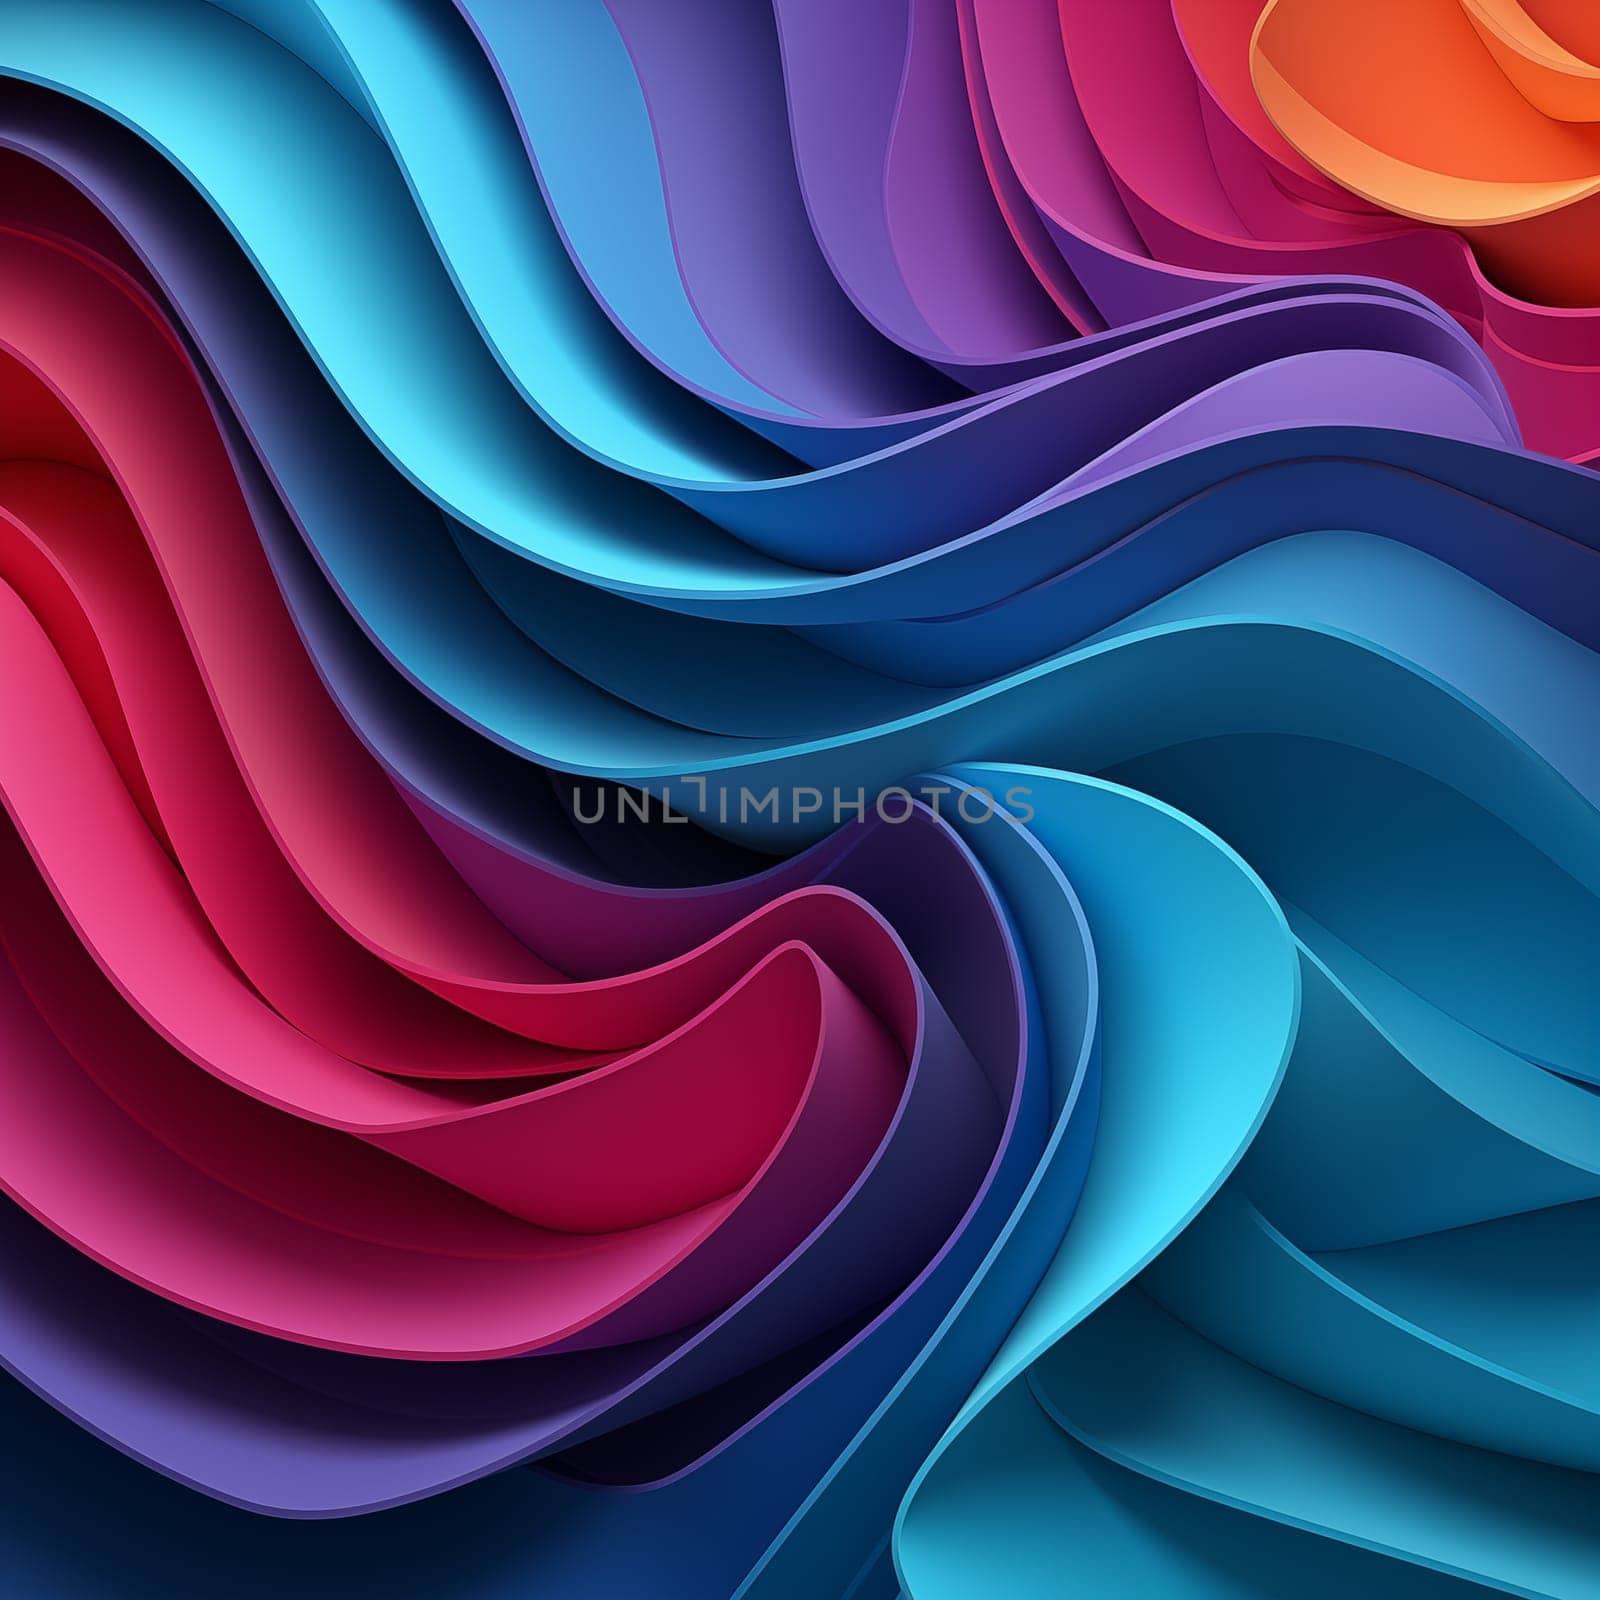 Abstract paper style background multipurpose. High quality photo